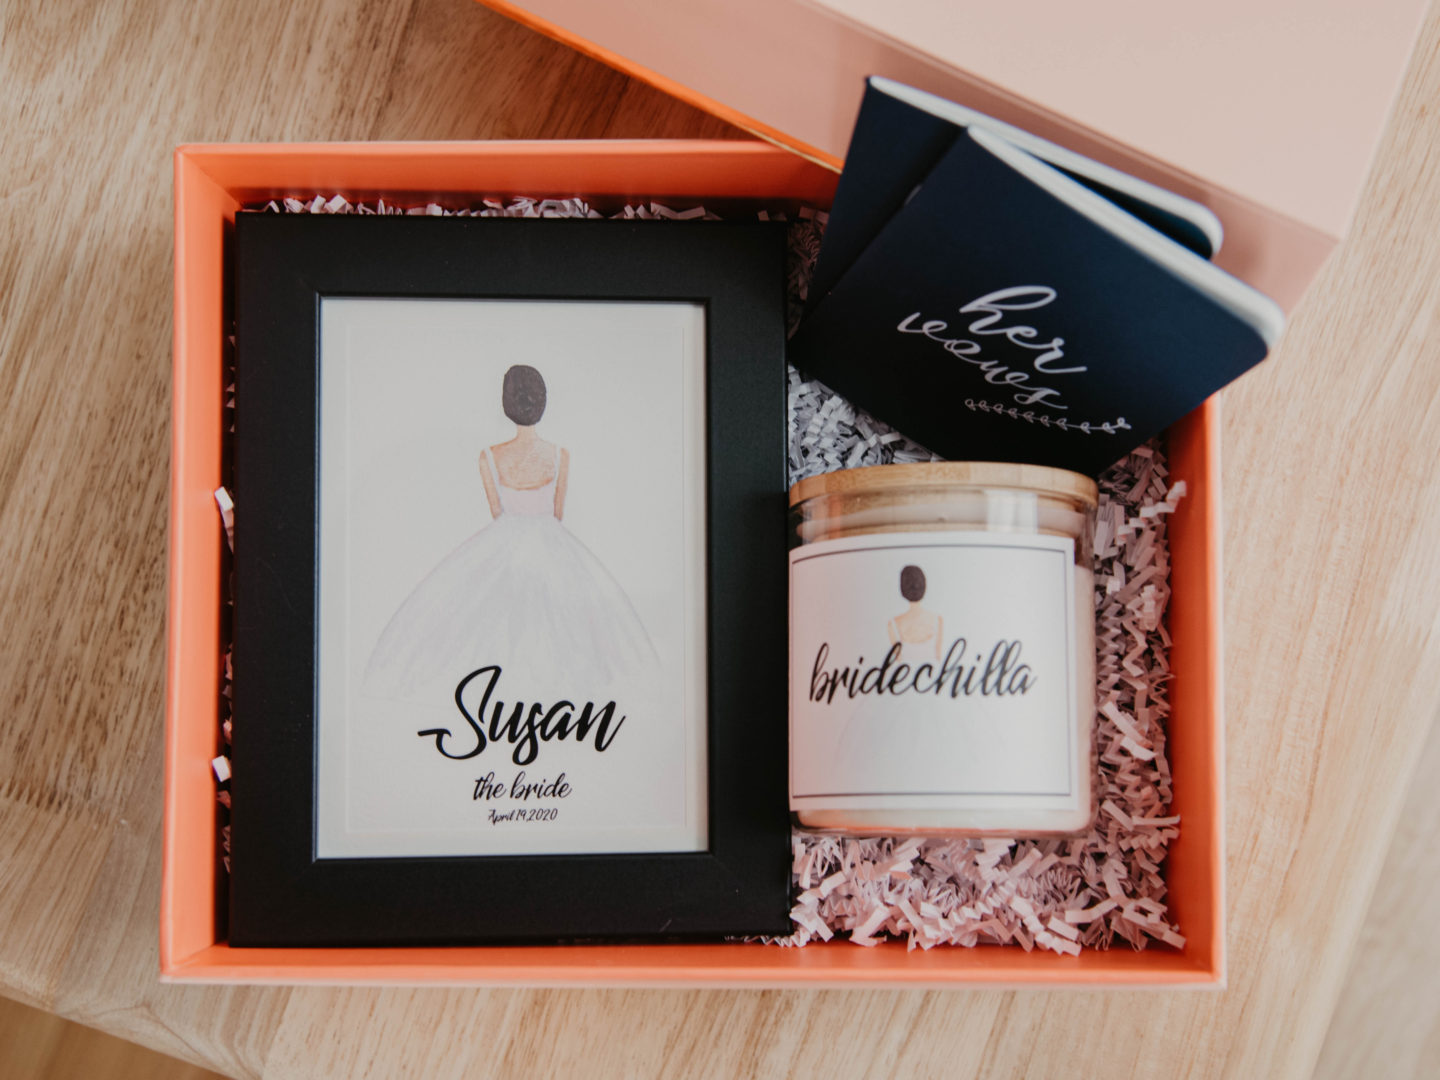 Best Bridal Shower Gifts: Top Gift Ideas for the Bride-to-be